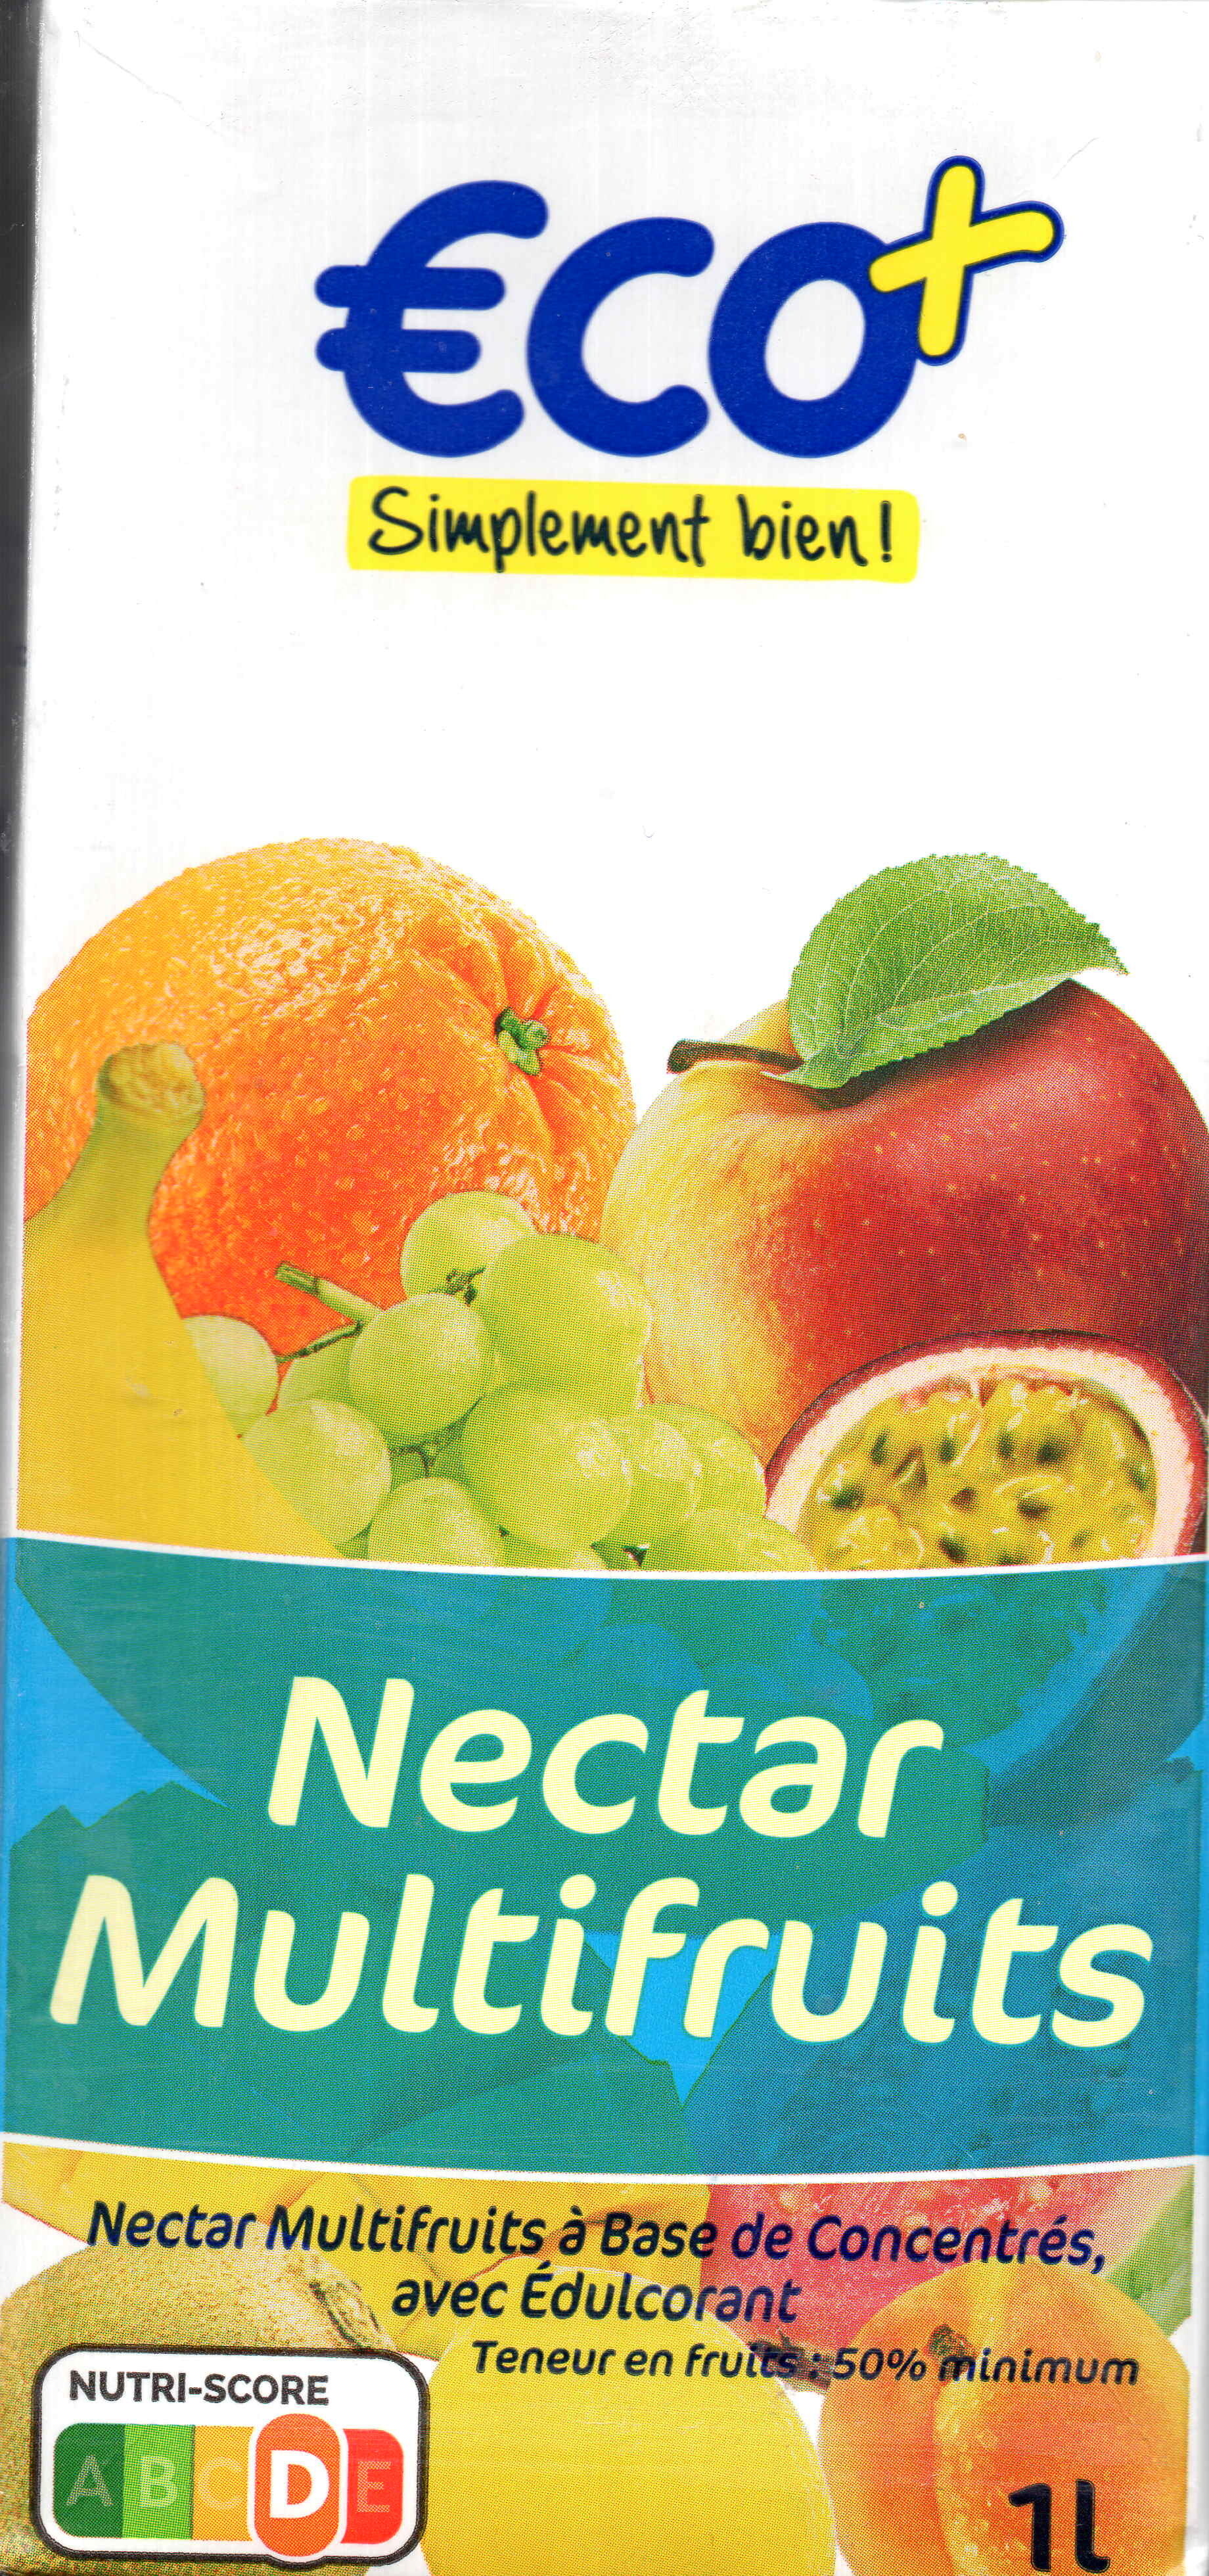 Nectar multifruits Éco+ - Product - fr